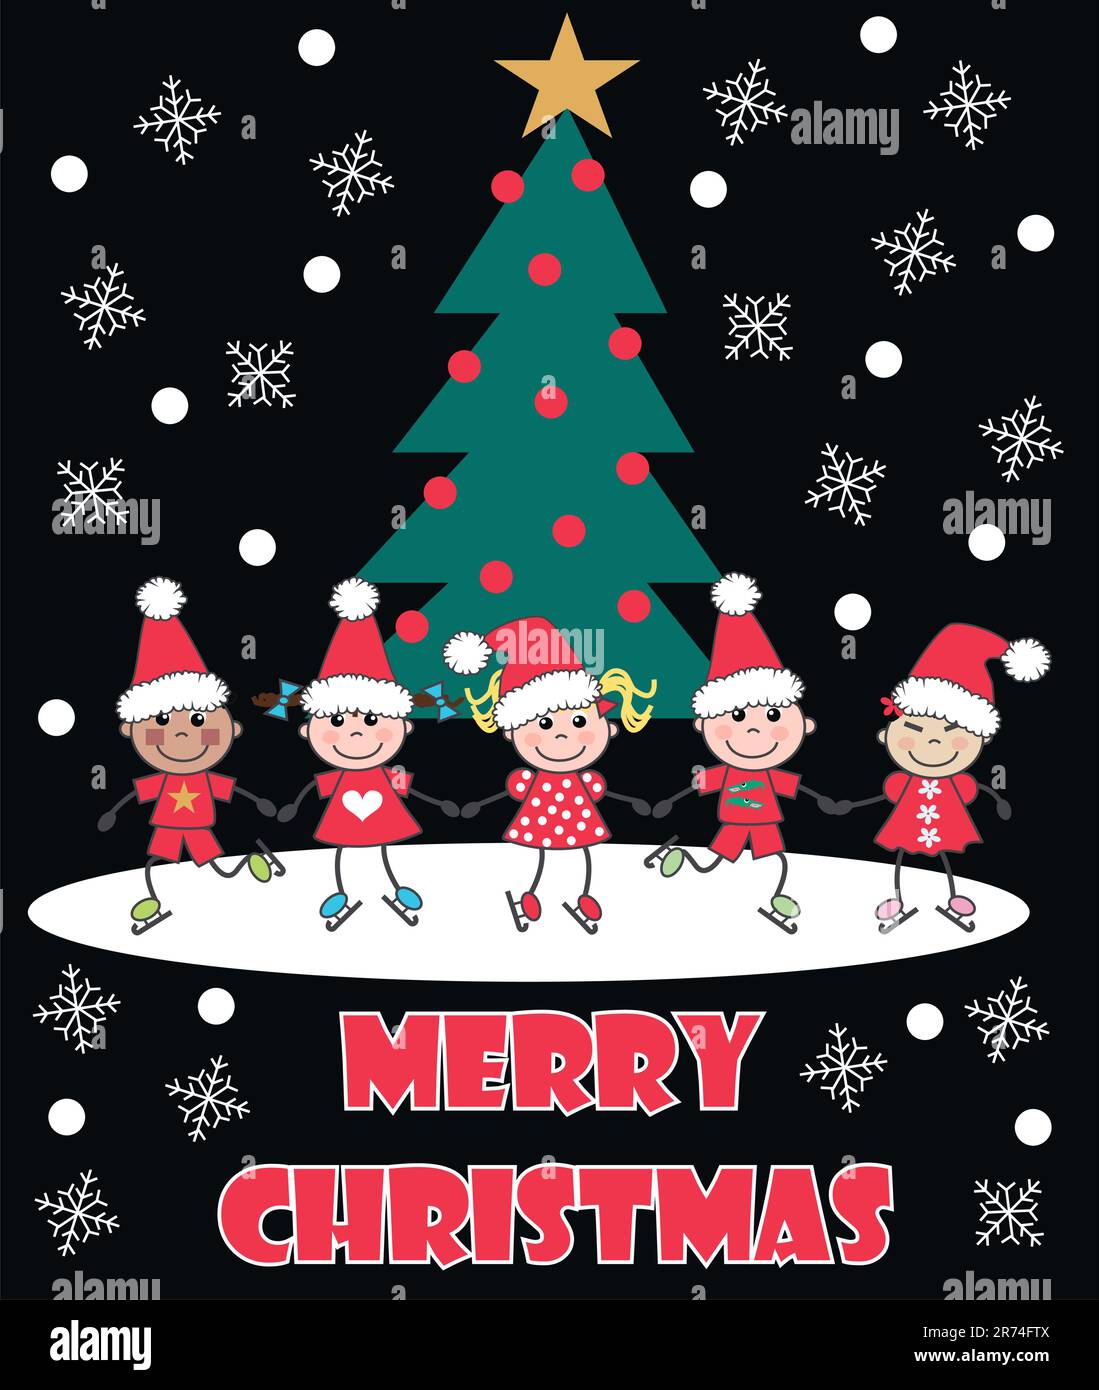 merry christmas card with mixed ethnic kids Stock Vector